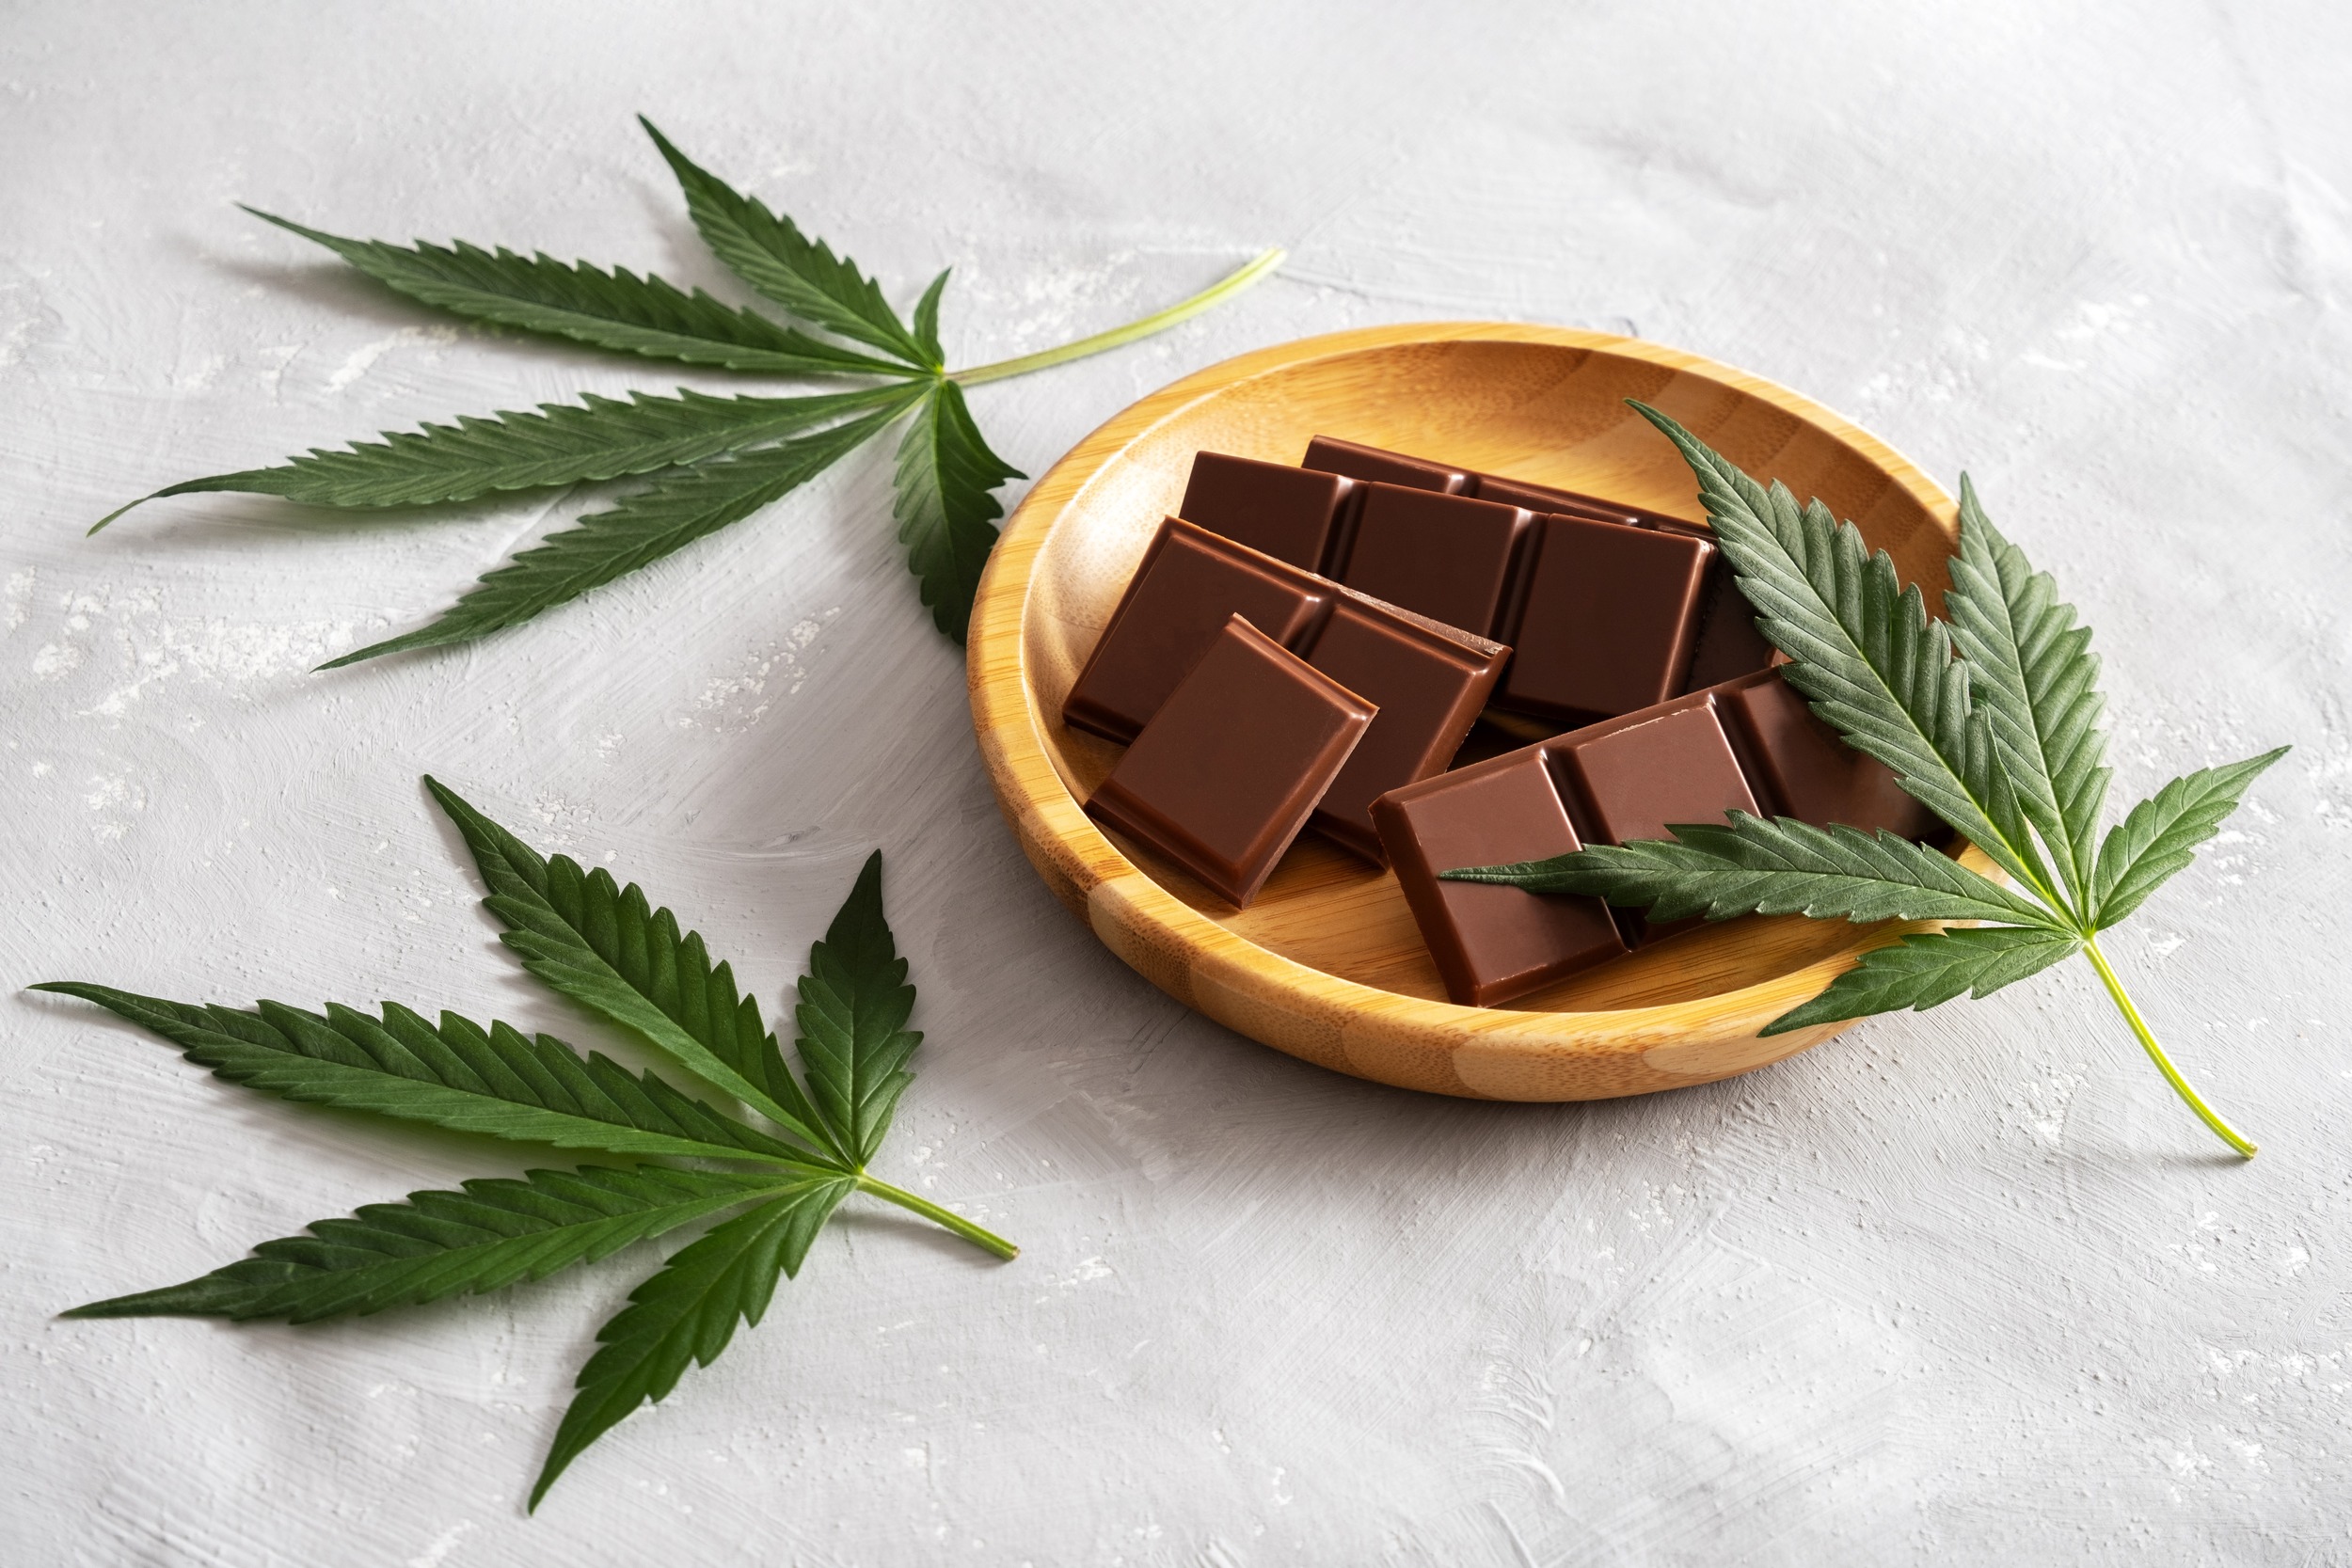 chocolate-bars-on-wooden-tray-with-cannabis-leaves